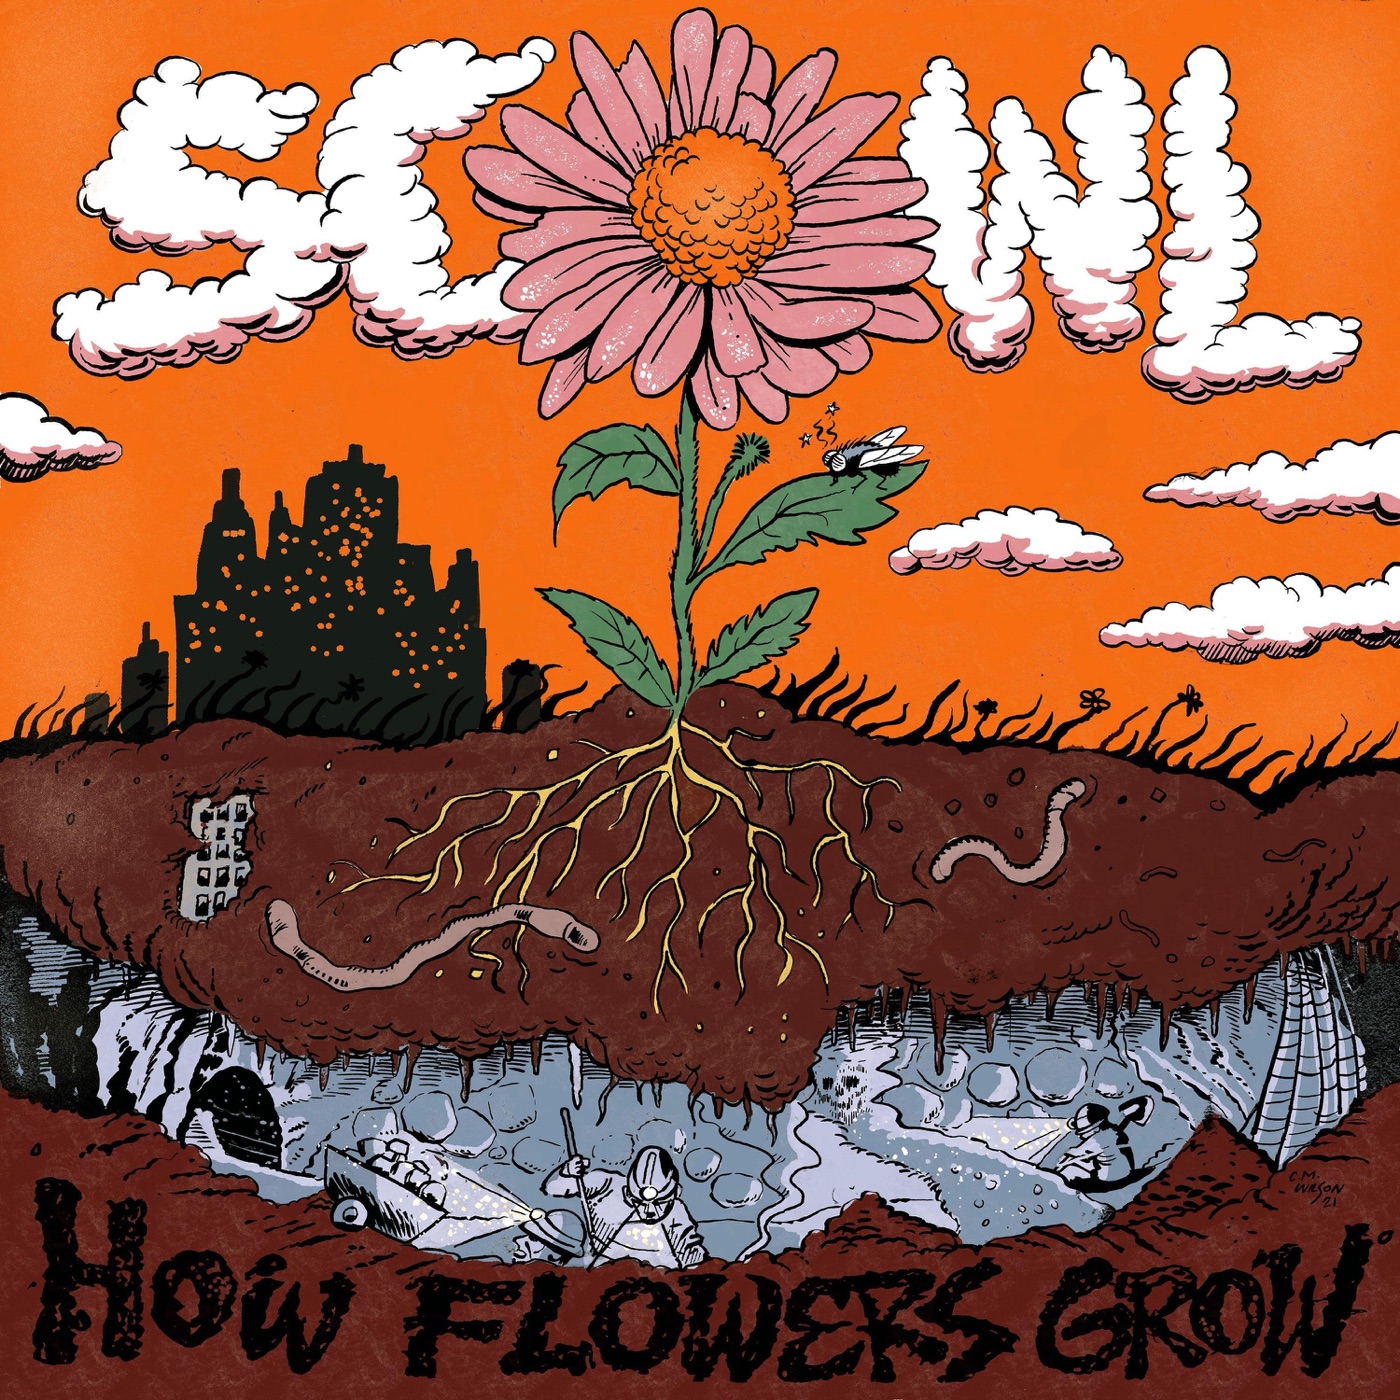 How Flowers Grow by Scowl